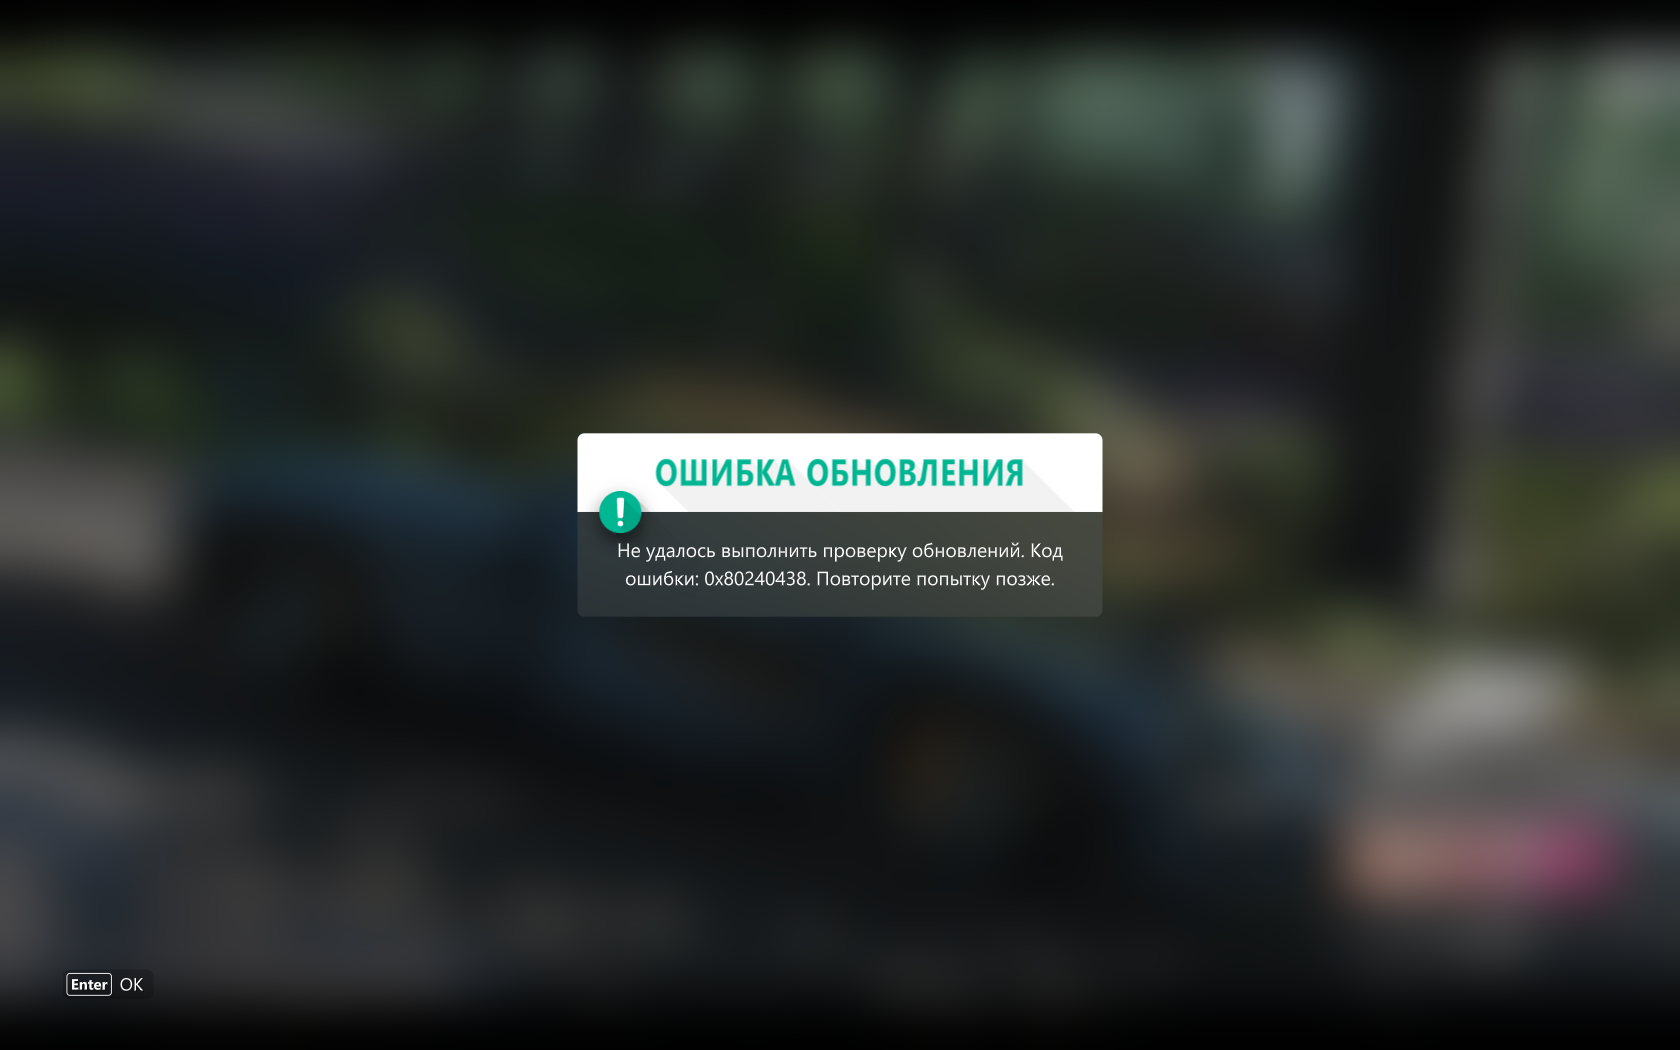 Forza Horizon 4 Error Code 0x80244007 - roblox error code 610 cannot join game with no authenticated user